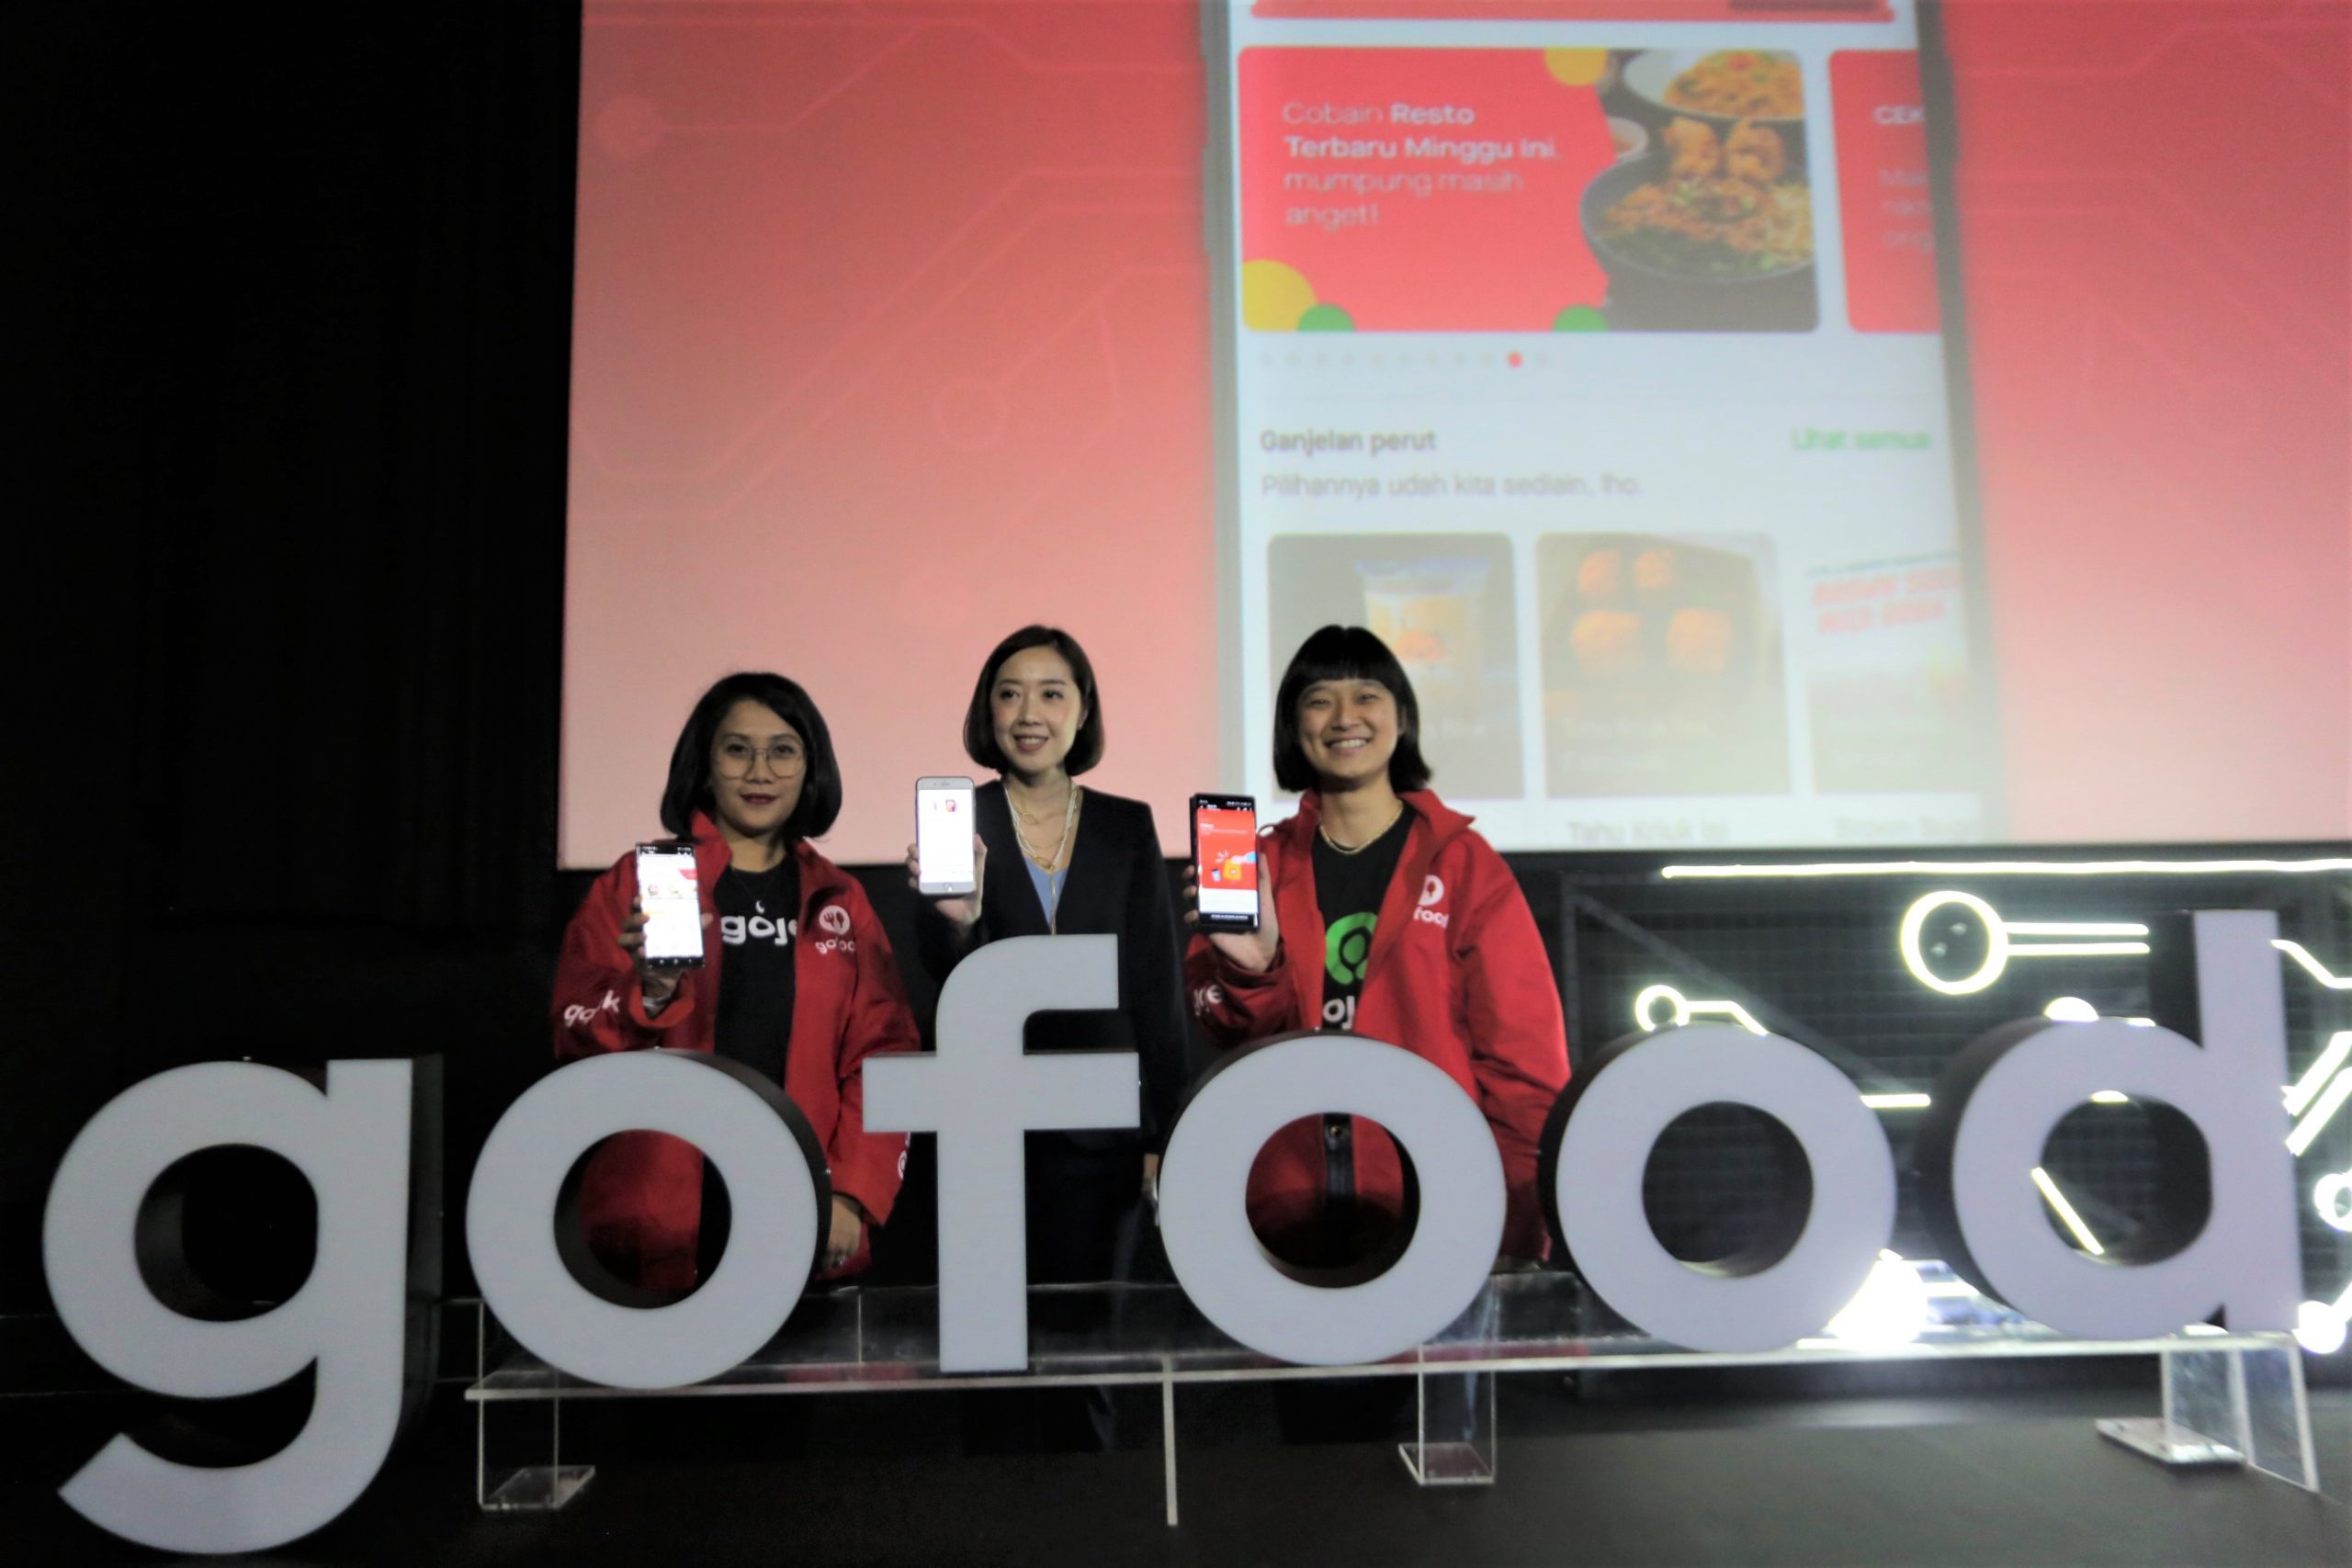 Indonesia Digest: GoFood launches new services; Traveloka ties up with BNI